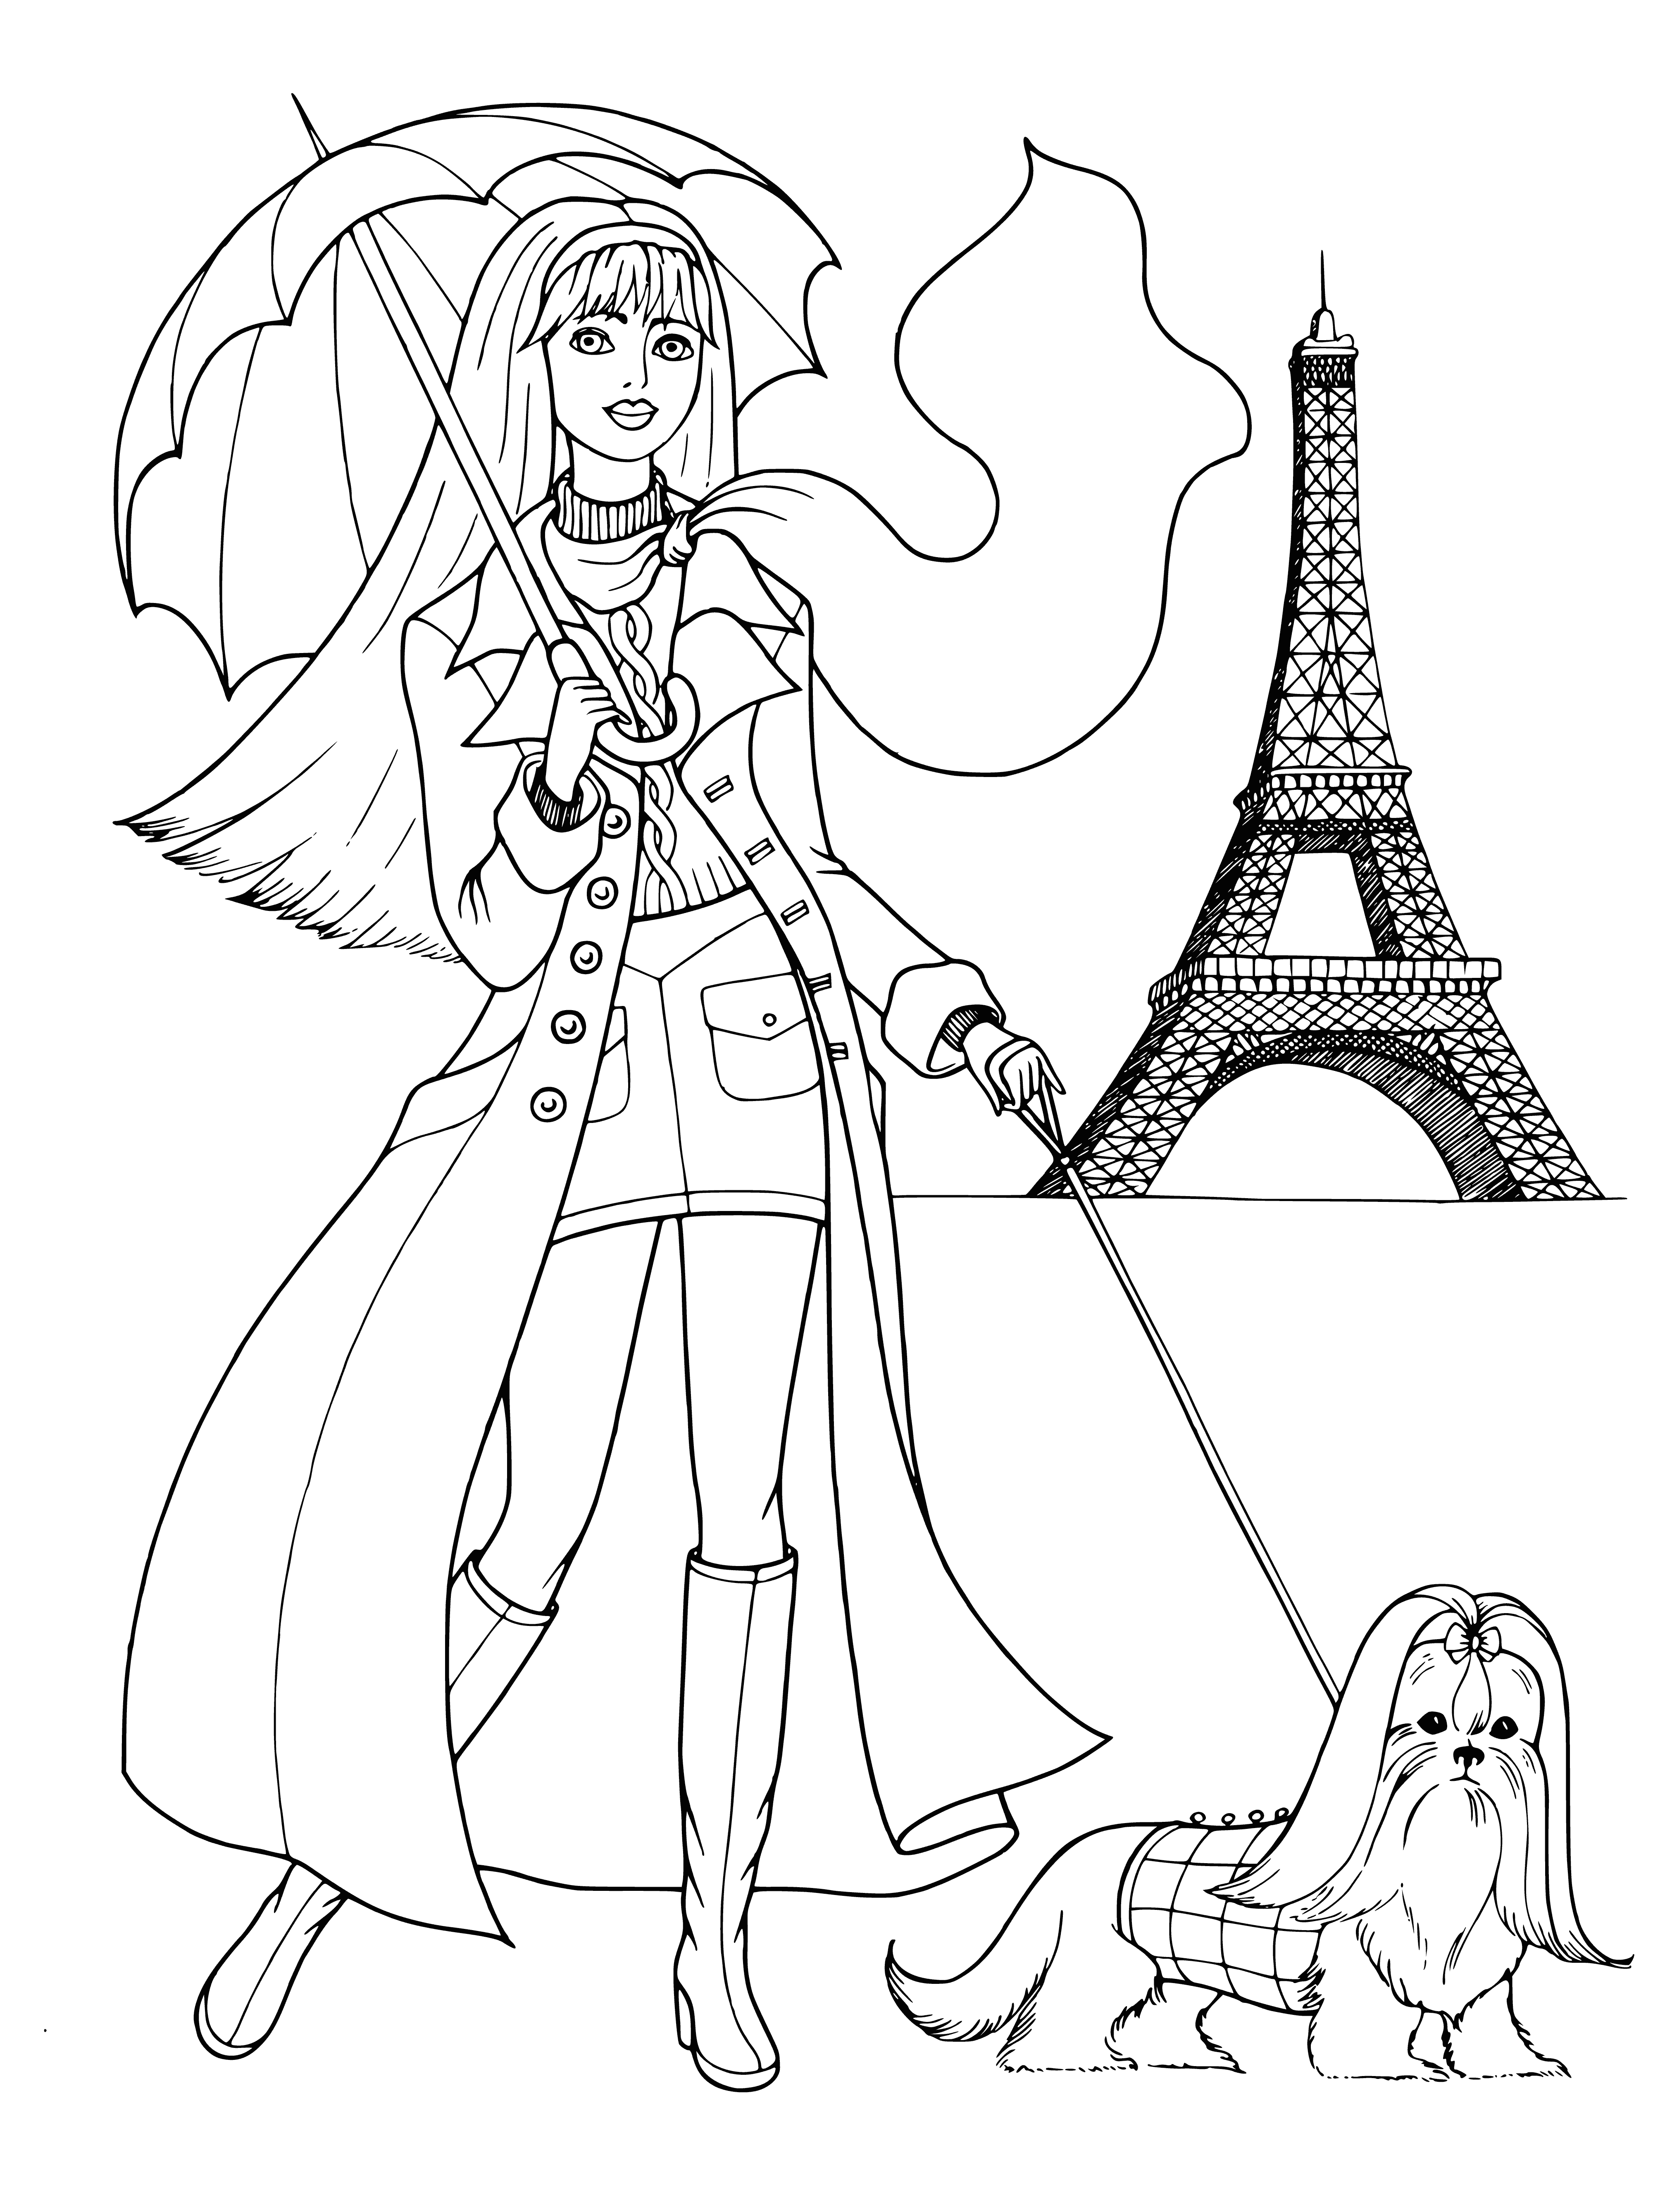 coloring page: Young woman in fashionable outfit sitting on Paris bench, legs crossed, smiling happily at camera. #ParisStyle